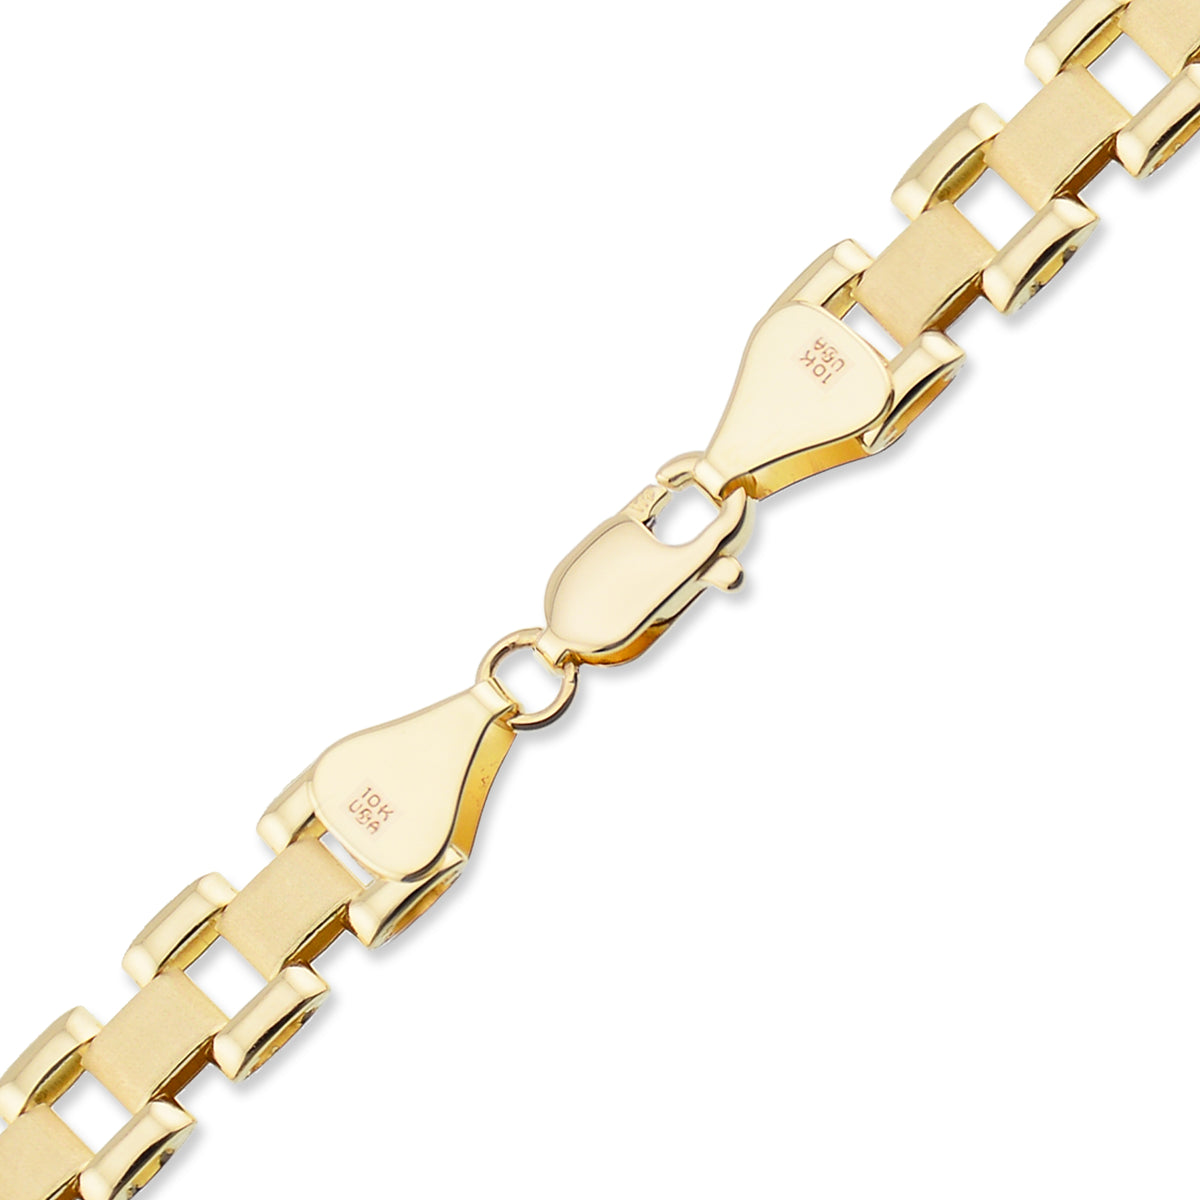 10K Real Gold 6 MM Presidential Watch Band Style Link Chain